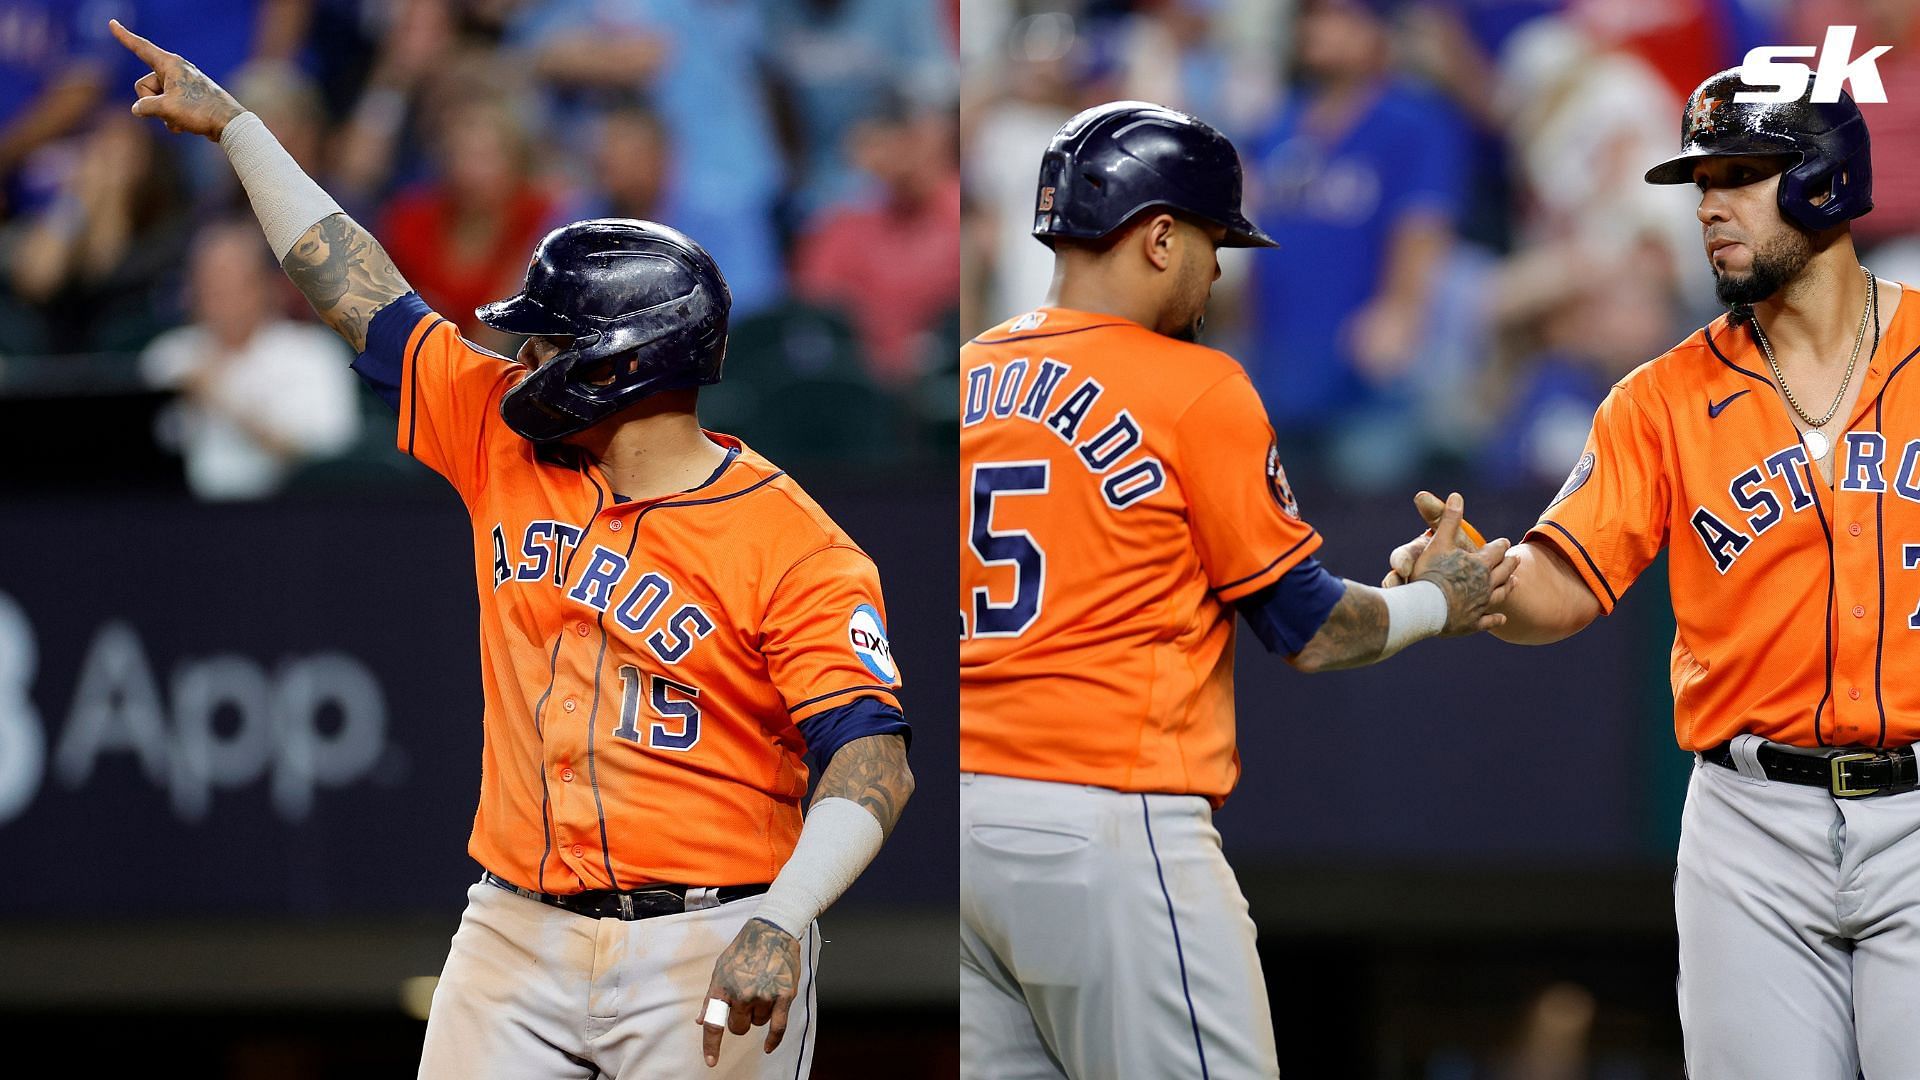 Astros fans revel in joy after team&rsquo;s fighting ALCS win to snap Rangers&rsquo; streak. 